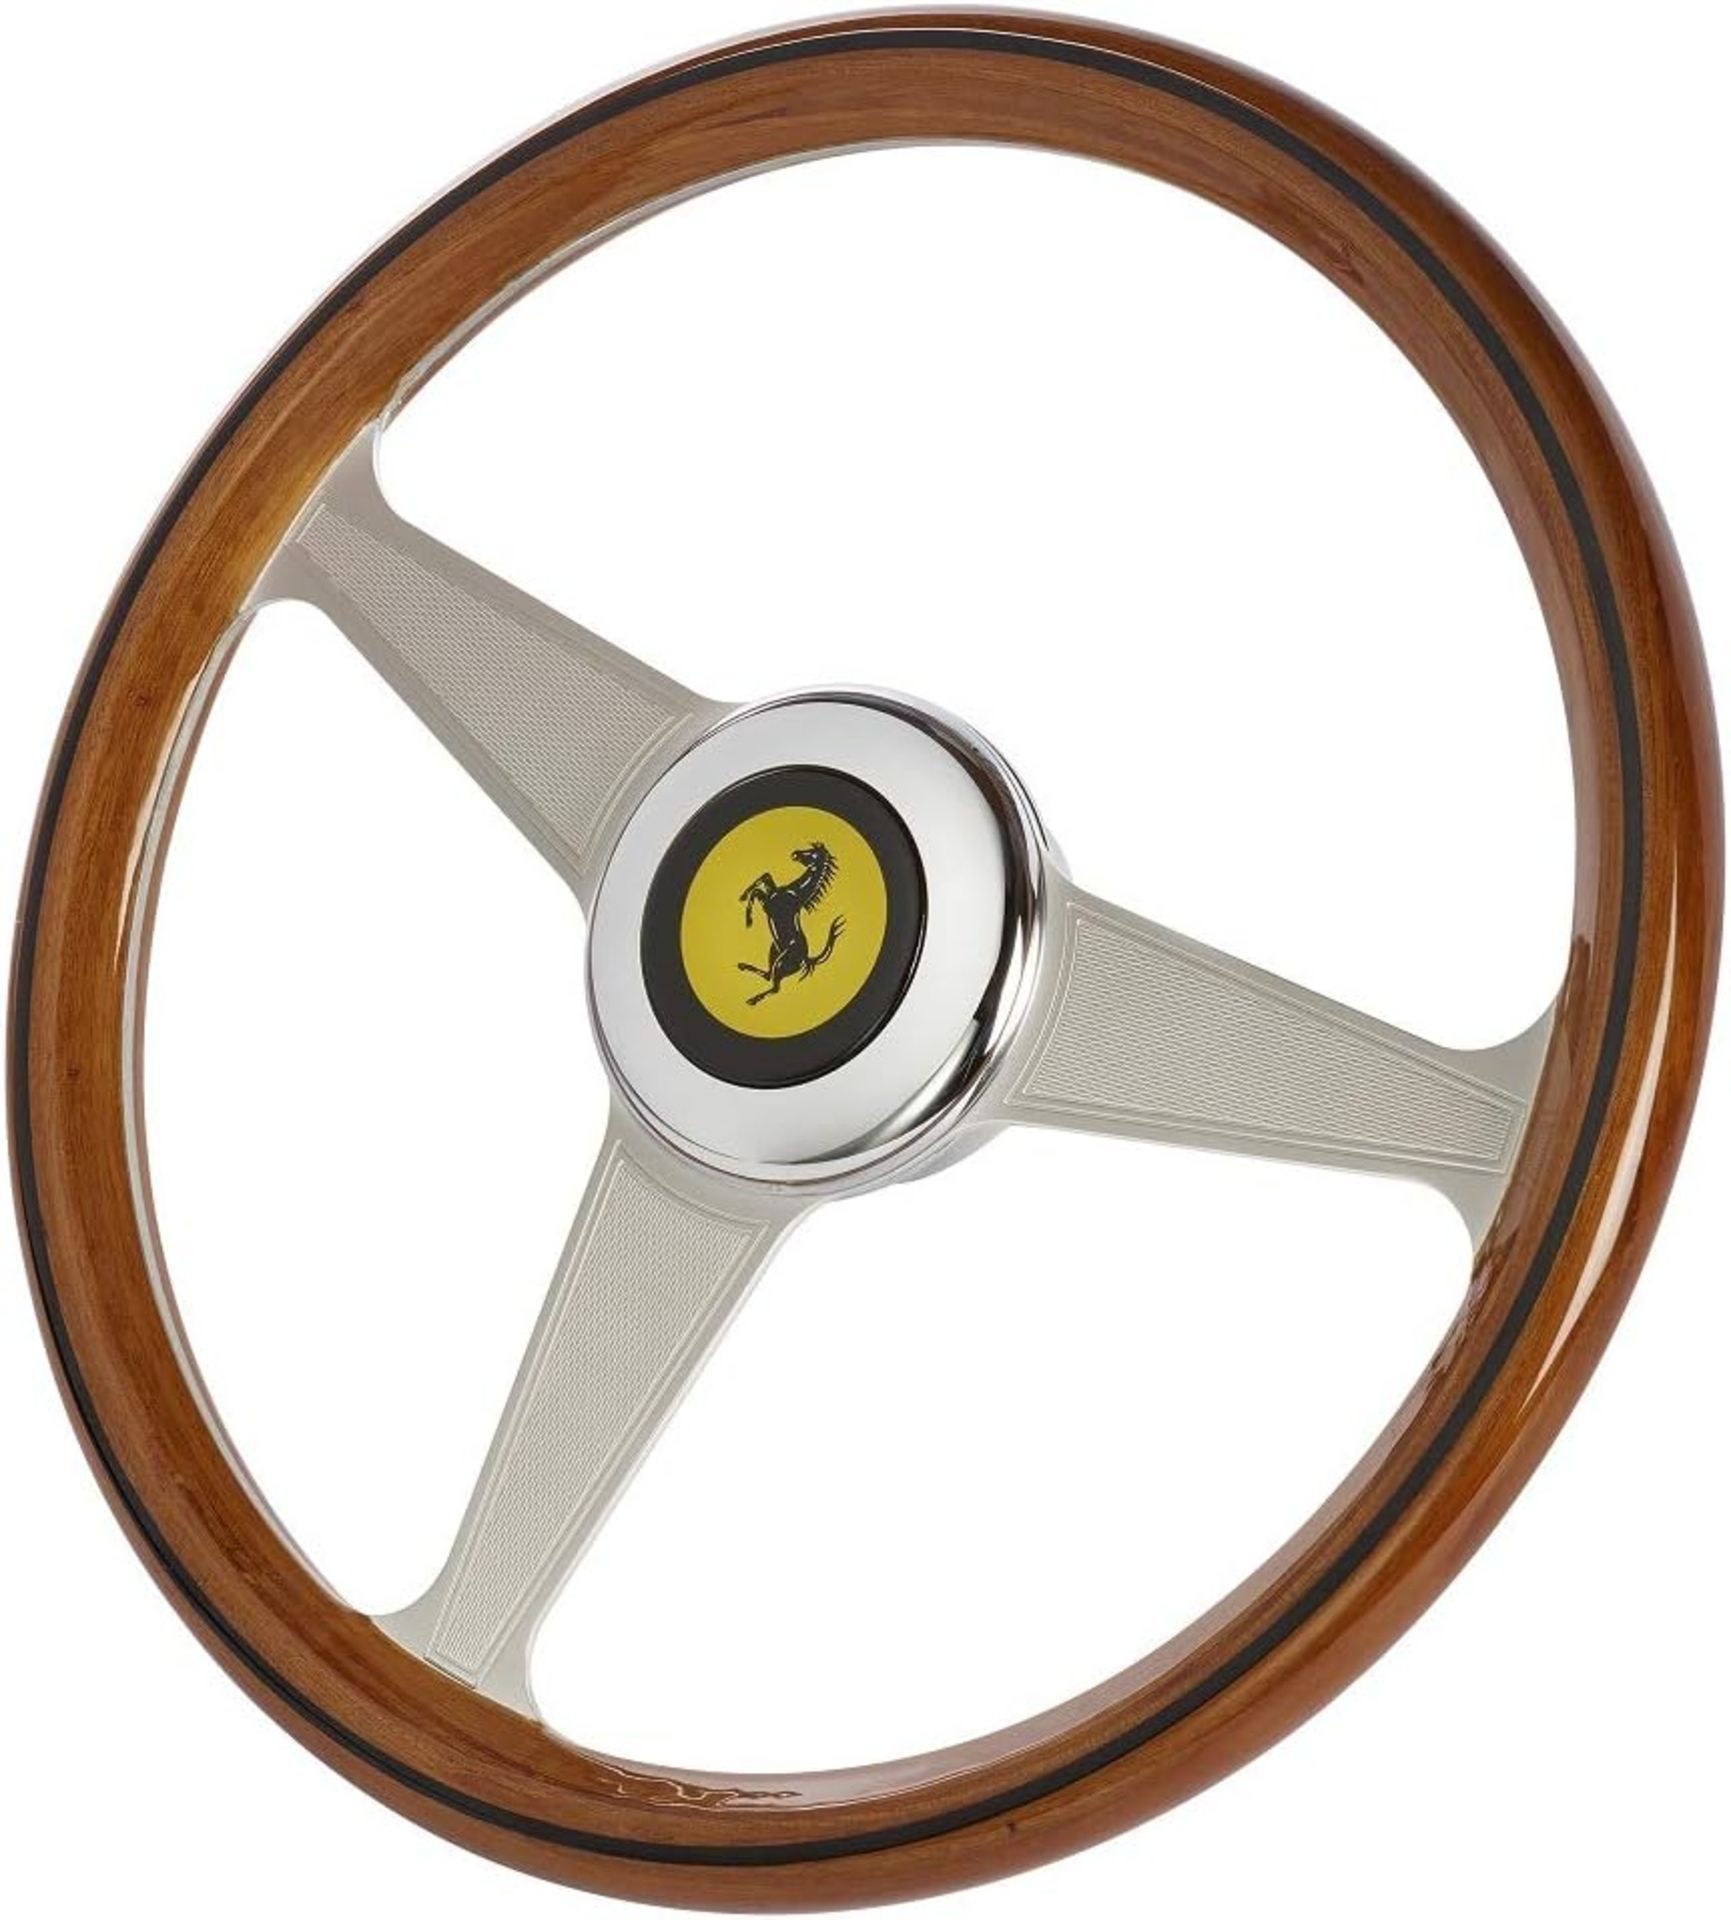 NEW & BOXED THRUSTMASTER FERRARI 250 GTO Wheel Add On. RRP £344.99. Officially licensed by - Image 3 of 4